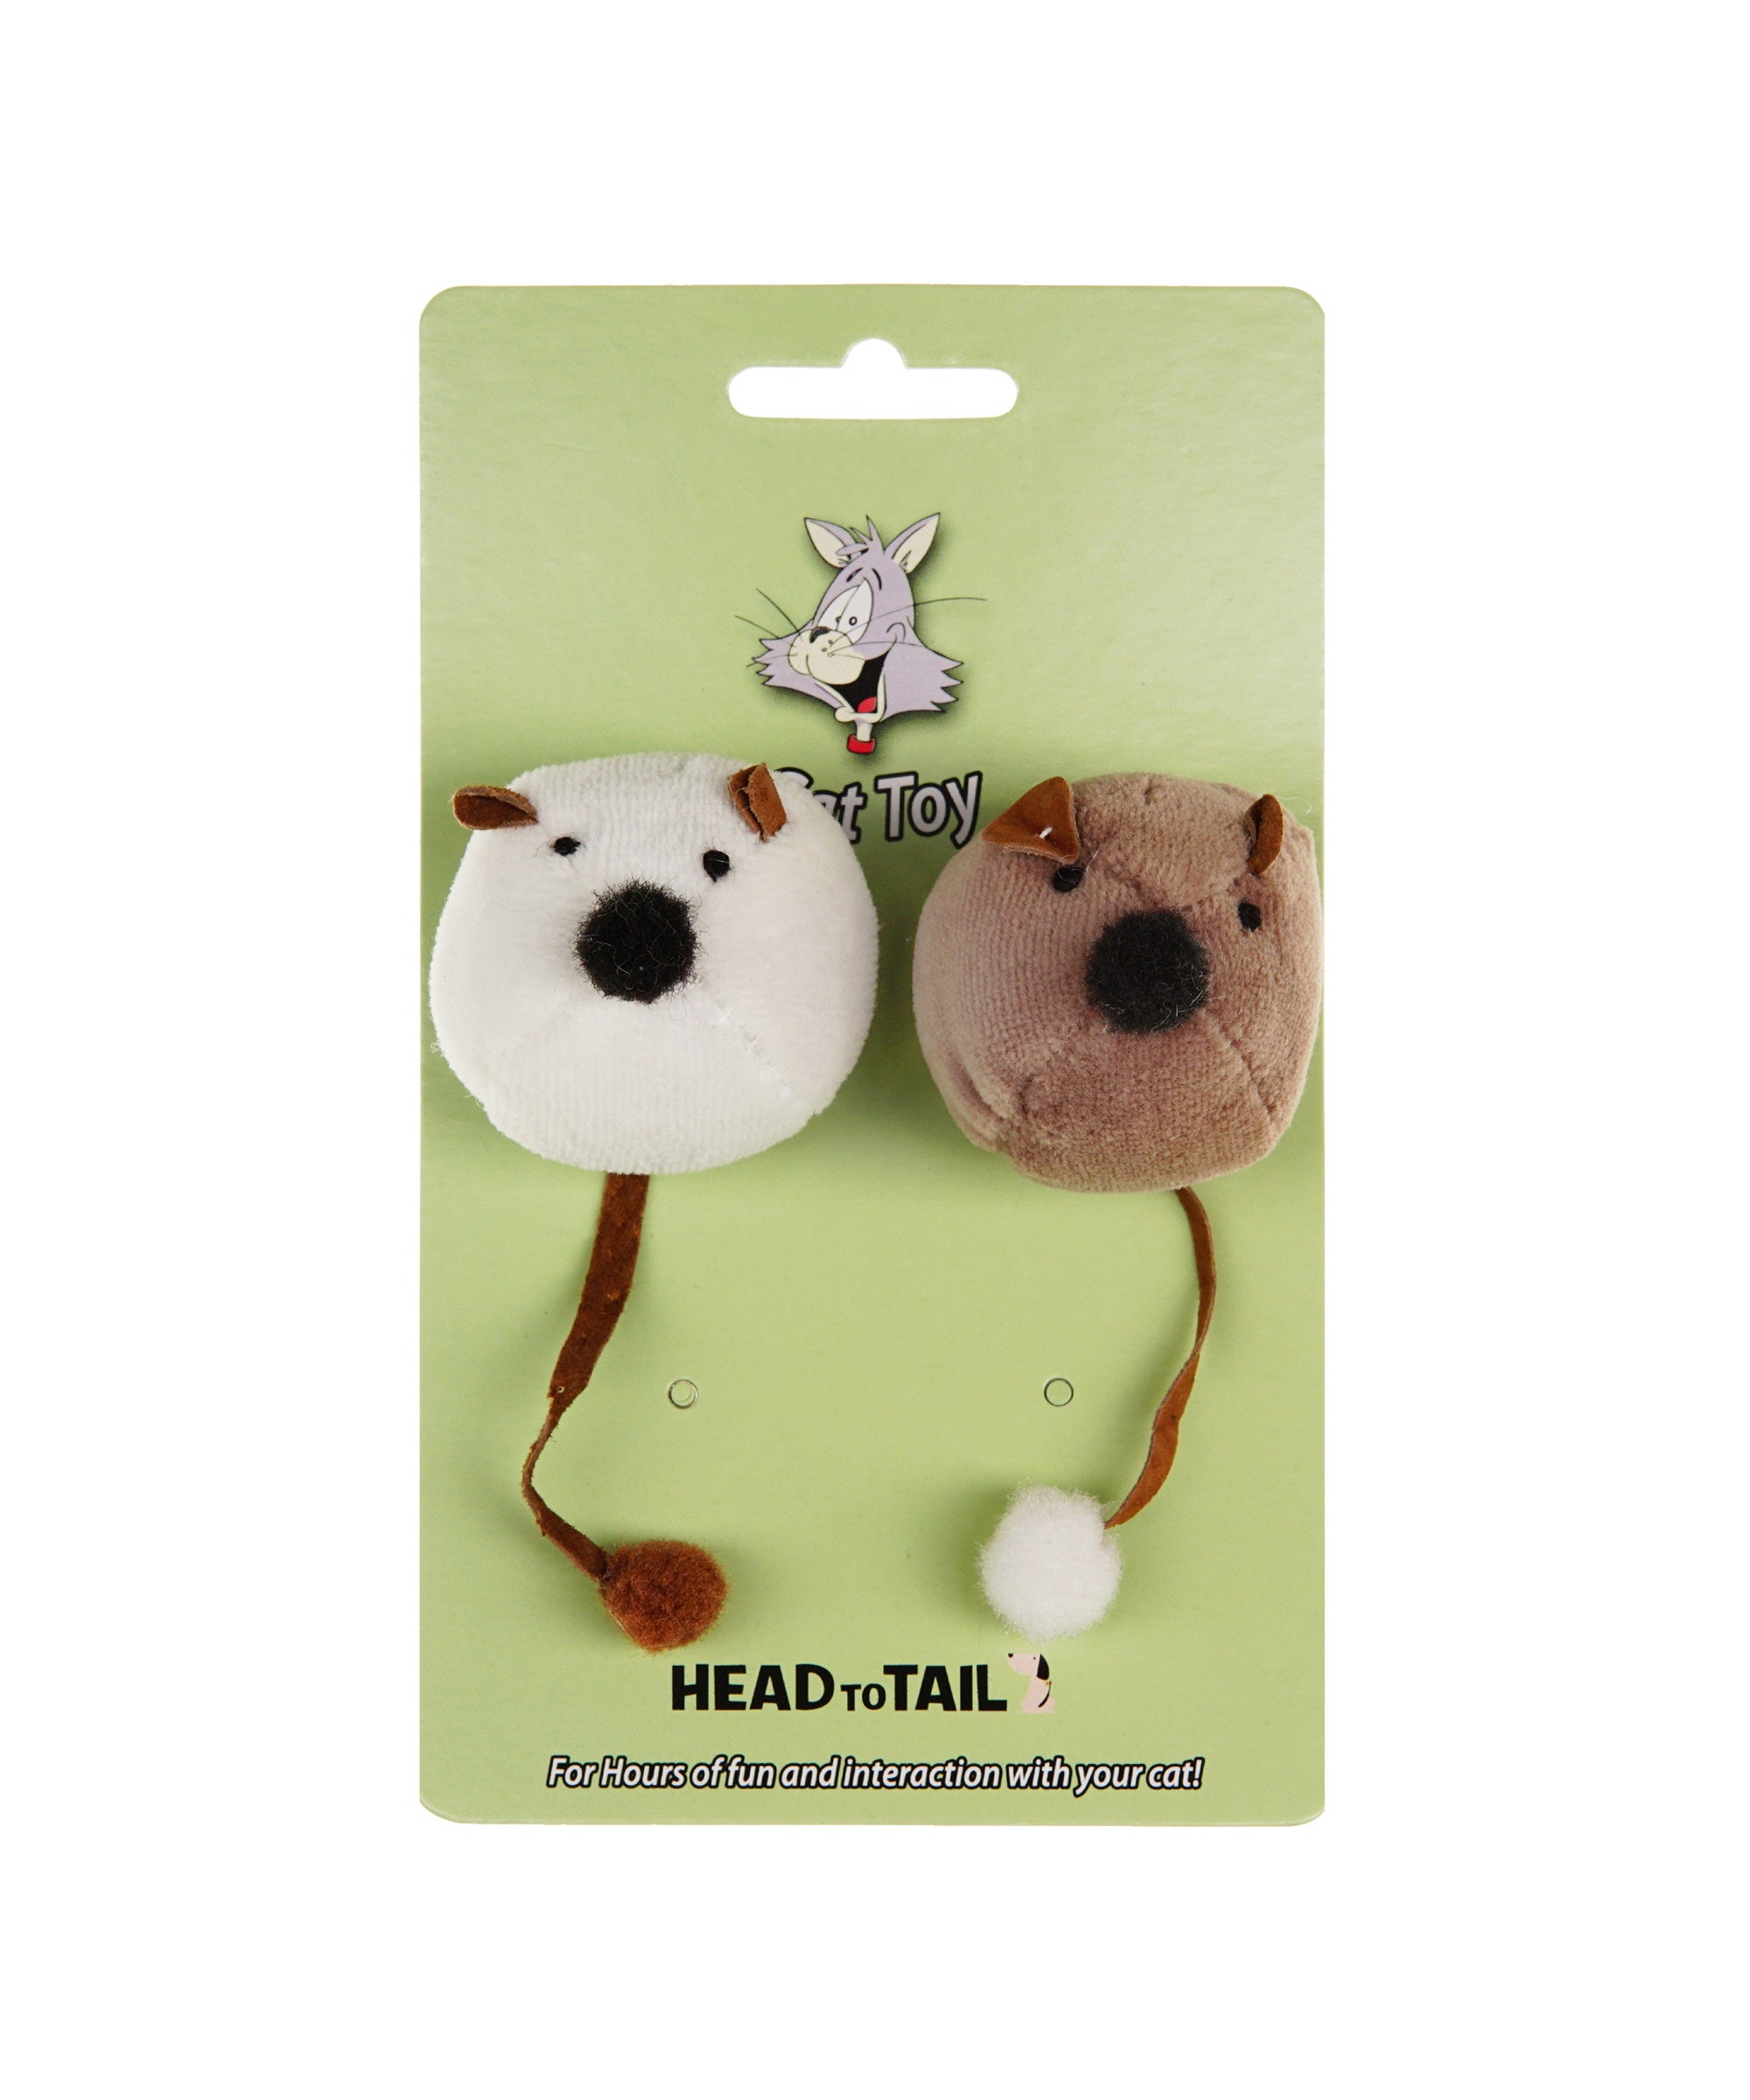 white and brown catnip ball mouse toy for cats 2"